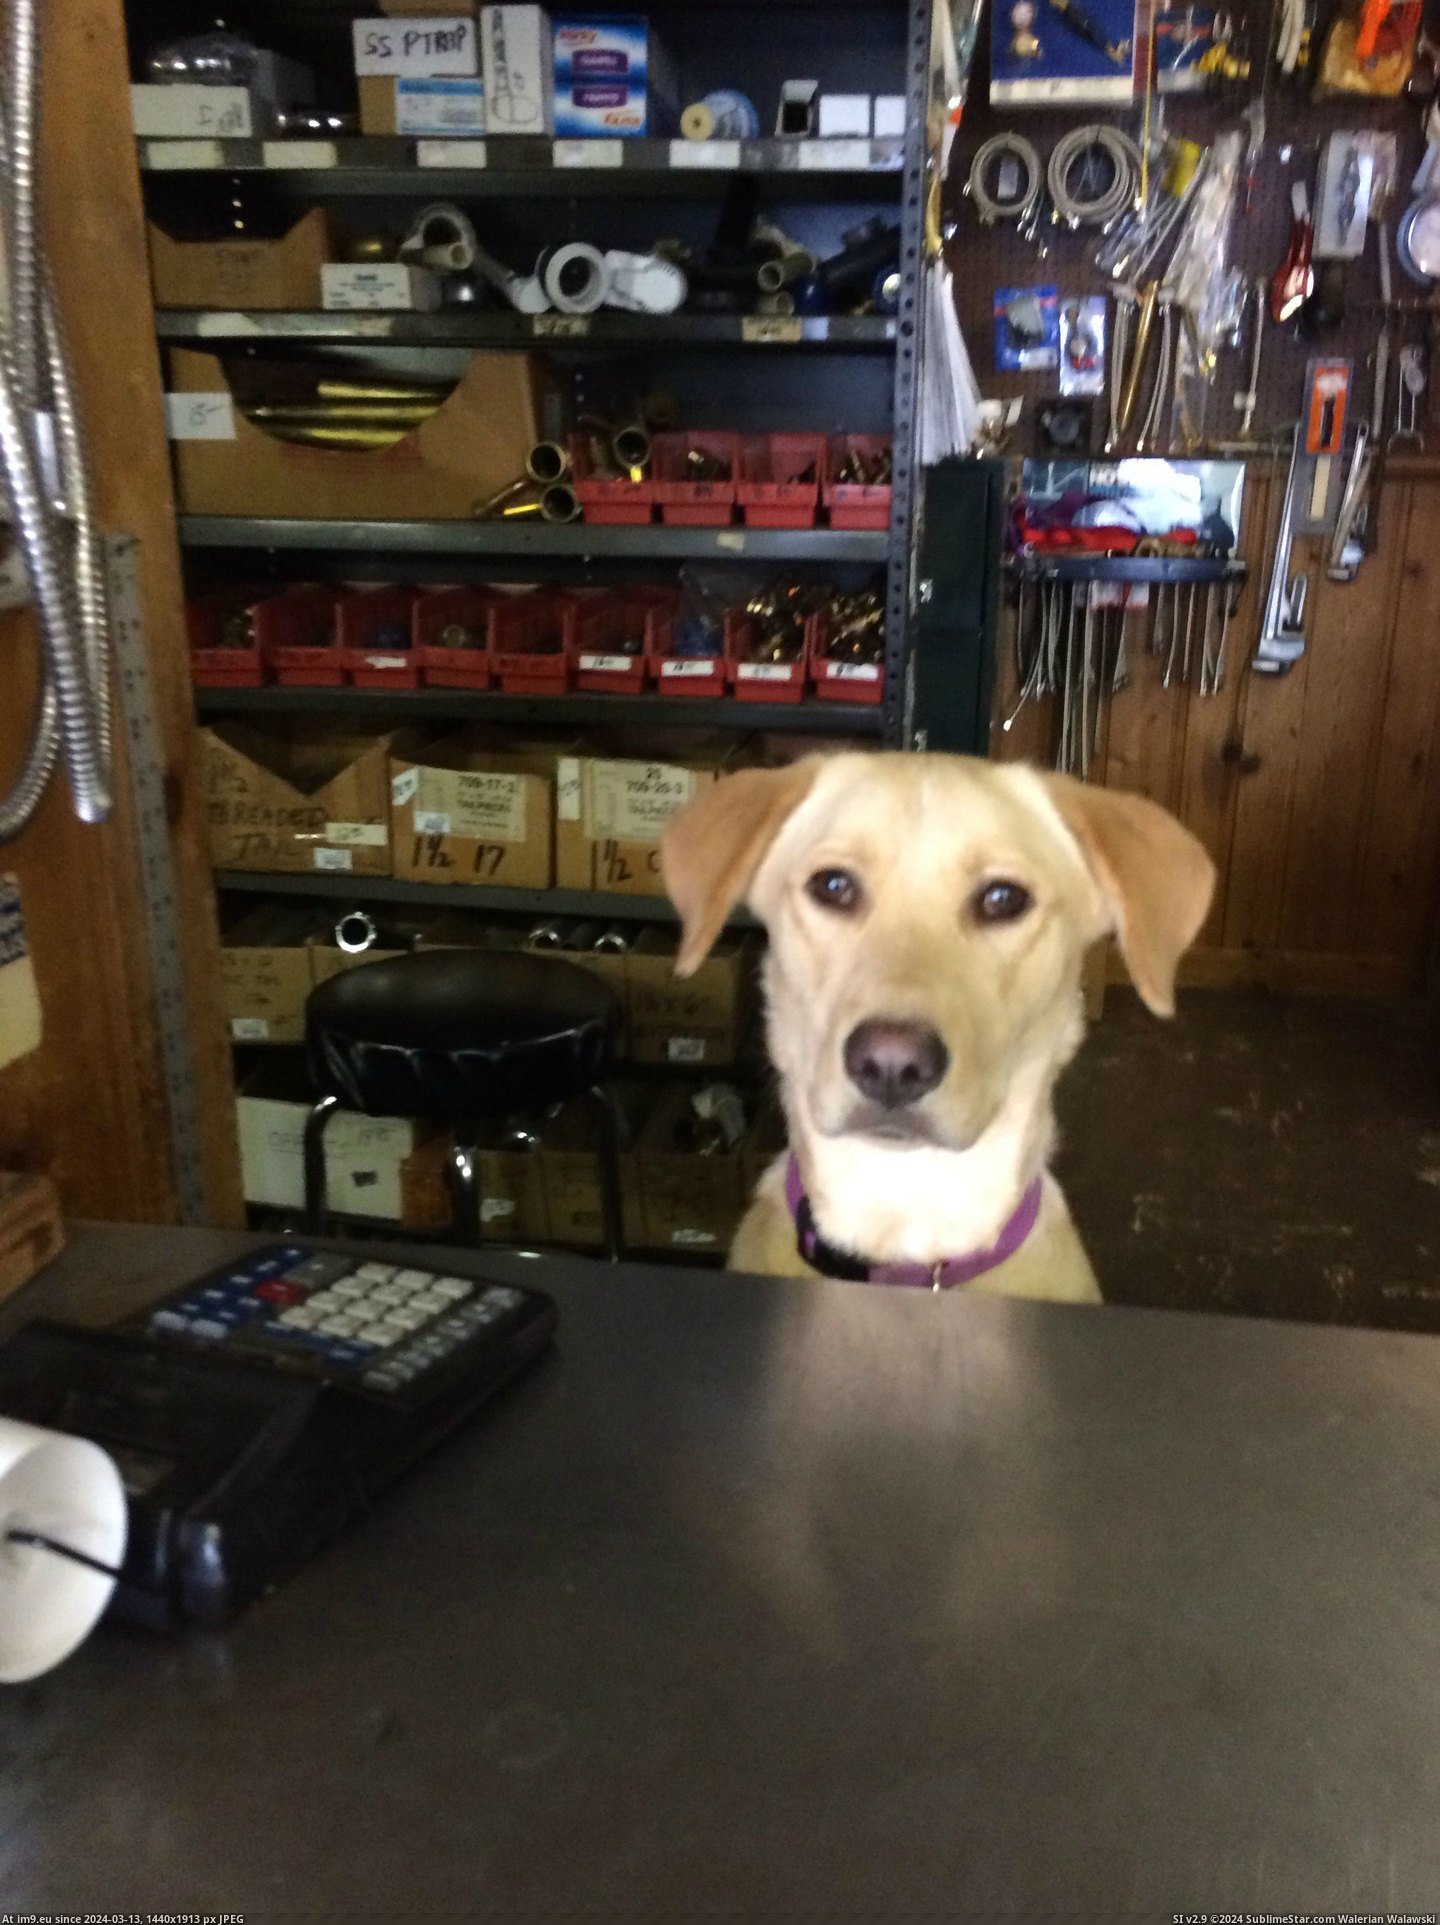 #High #She #Bit #Local #Plumbing #Bearable #Greeter #Store #Official #Supply #Prices [Aww] This is the official greeter at the local plumbing supply store. She makes the high prices a bit more bearable, at least. Pic. (Image of album My r/AWW favs))